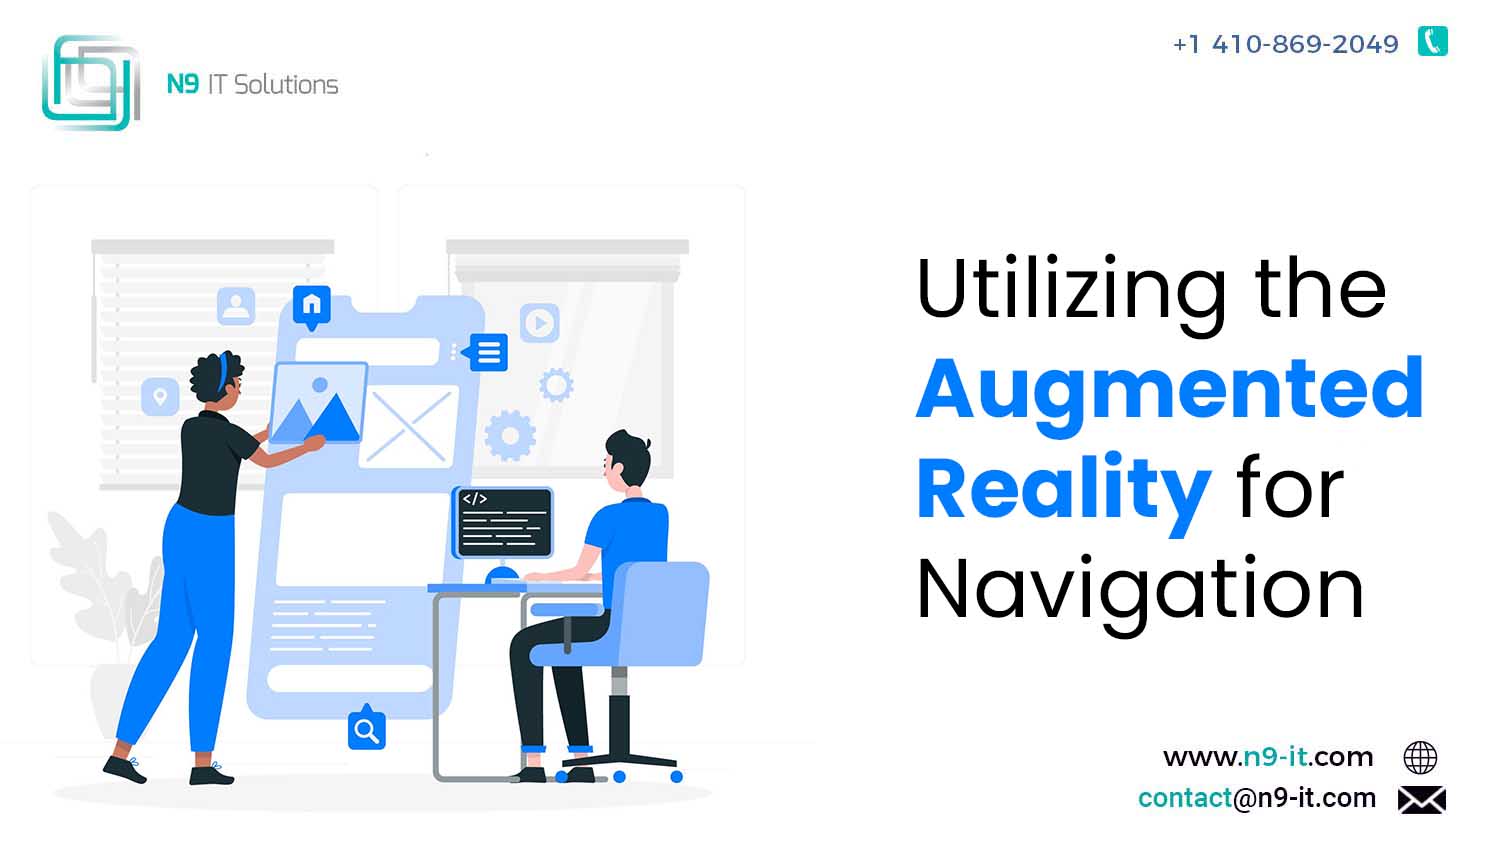 Utilizing the Augmented Reality for Navigation